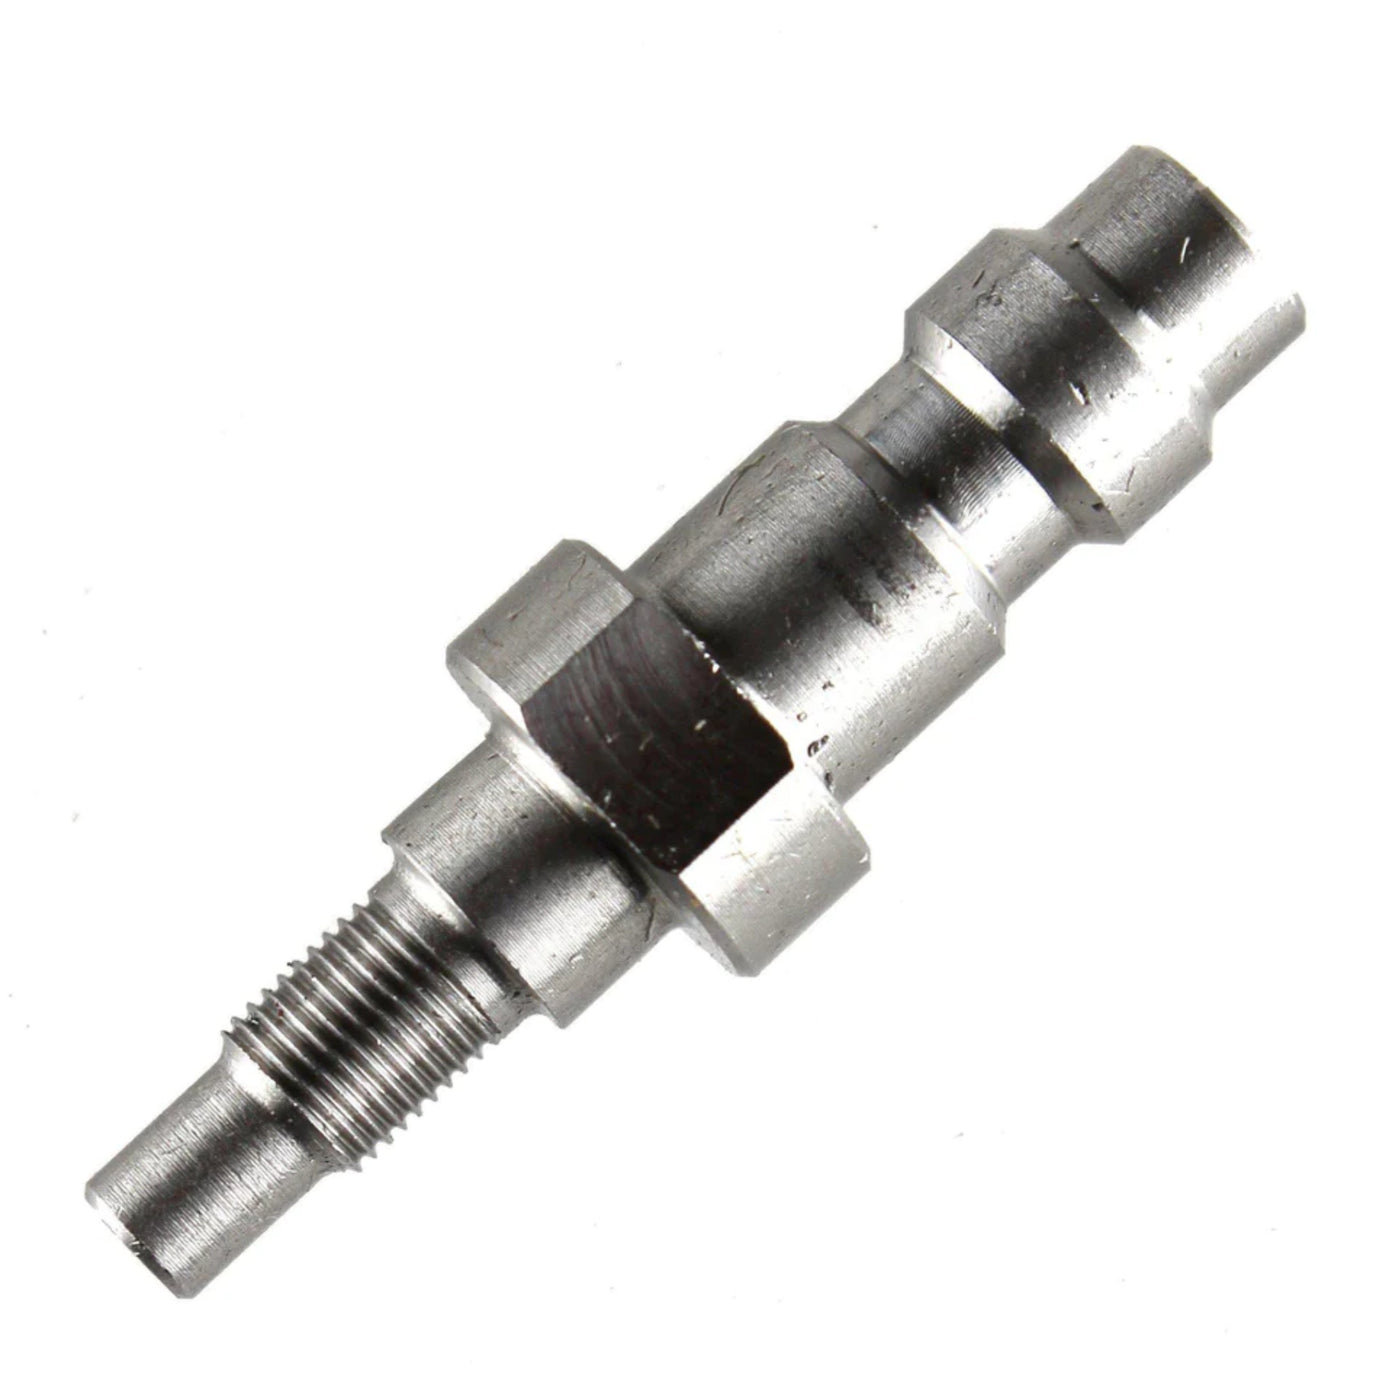 GBB GBBR Stainless Steel Airsoft Valve / HPA Adapter KWA